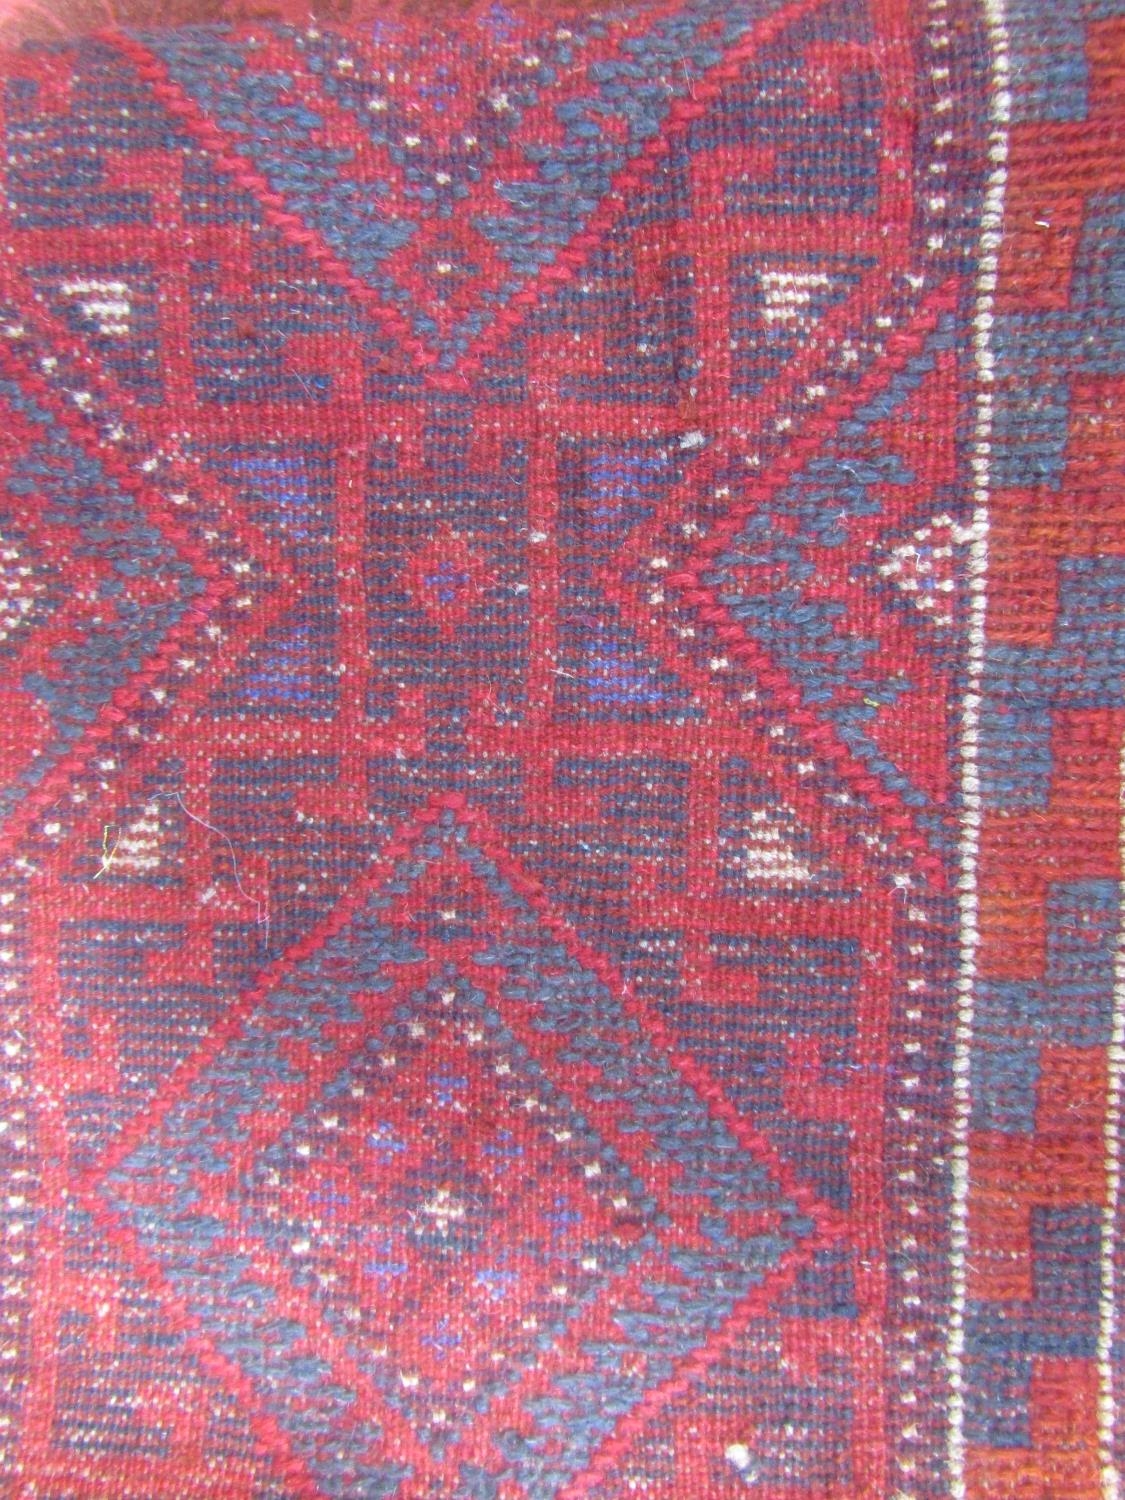 A Meshwani runner with a predominantly red and blue geometric pattern, 234cm x 57cm approx. - Image 3 of 3